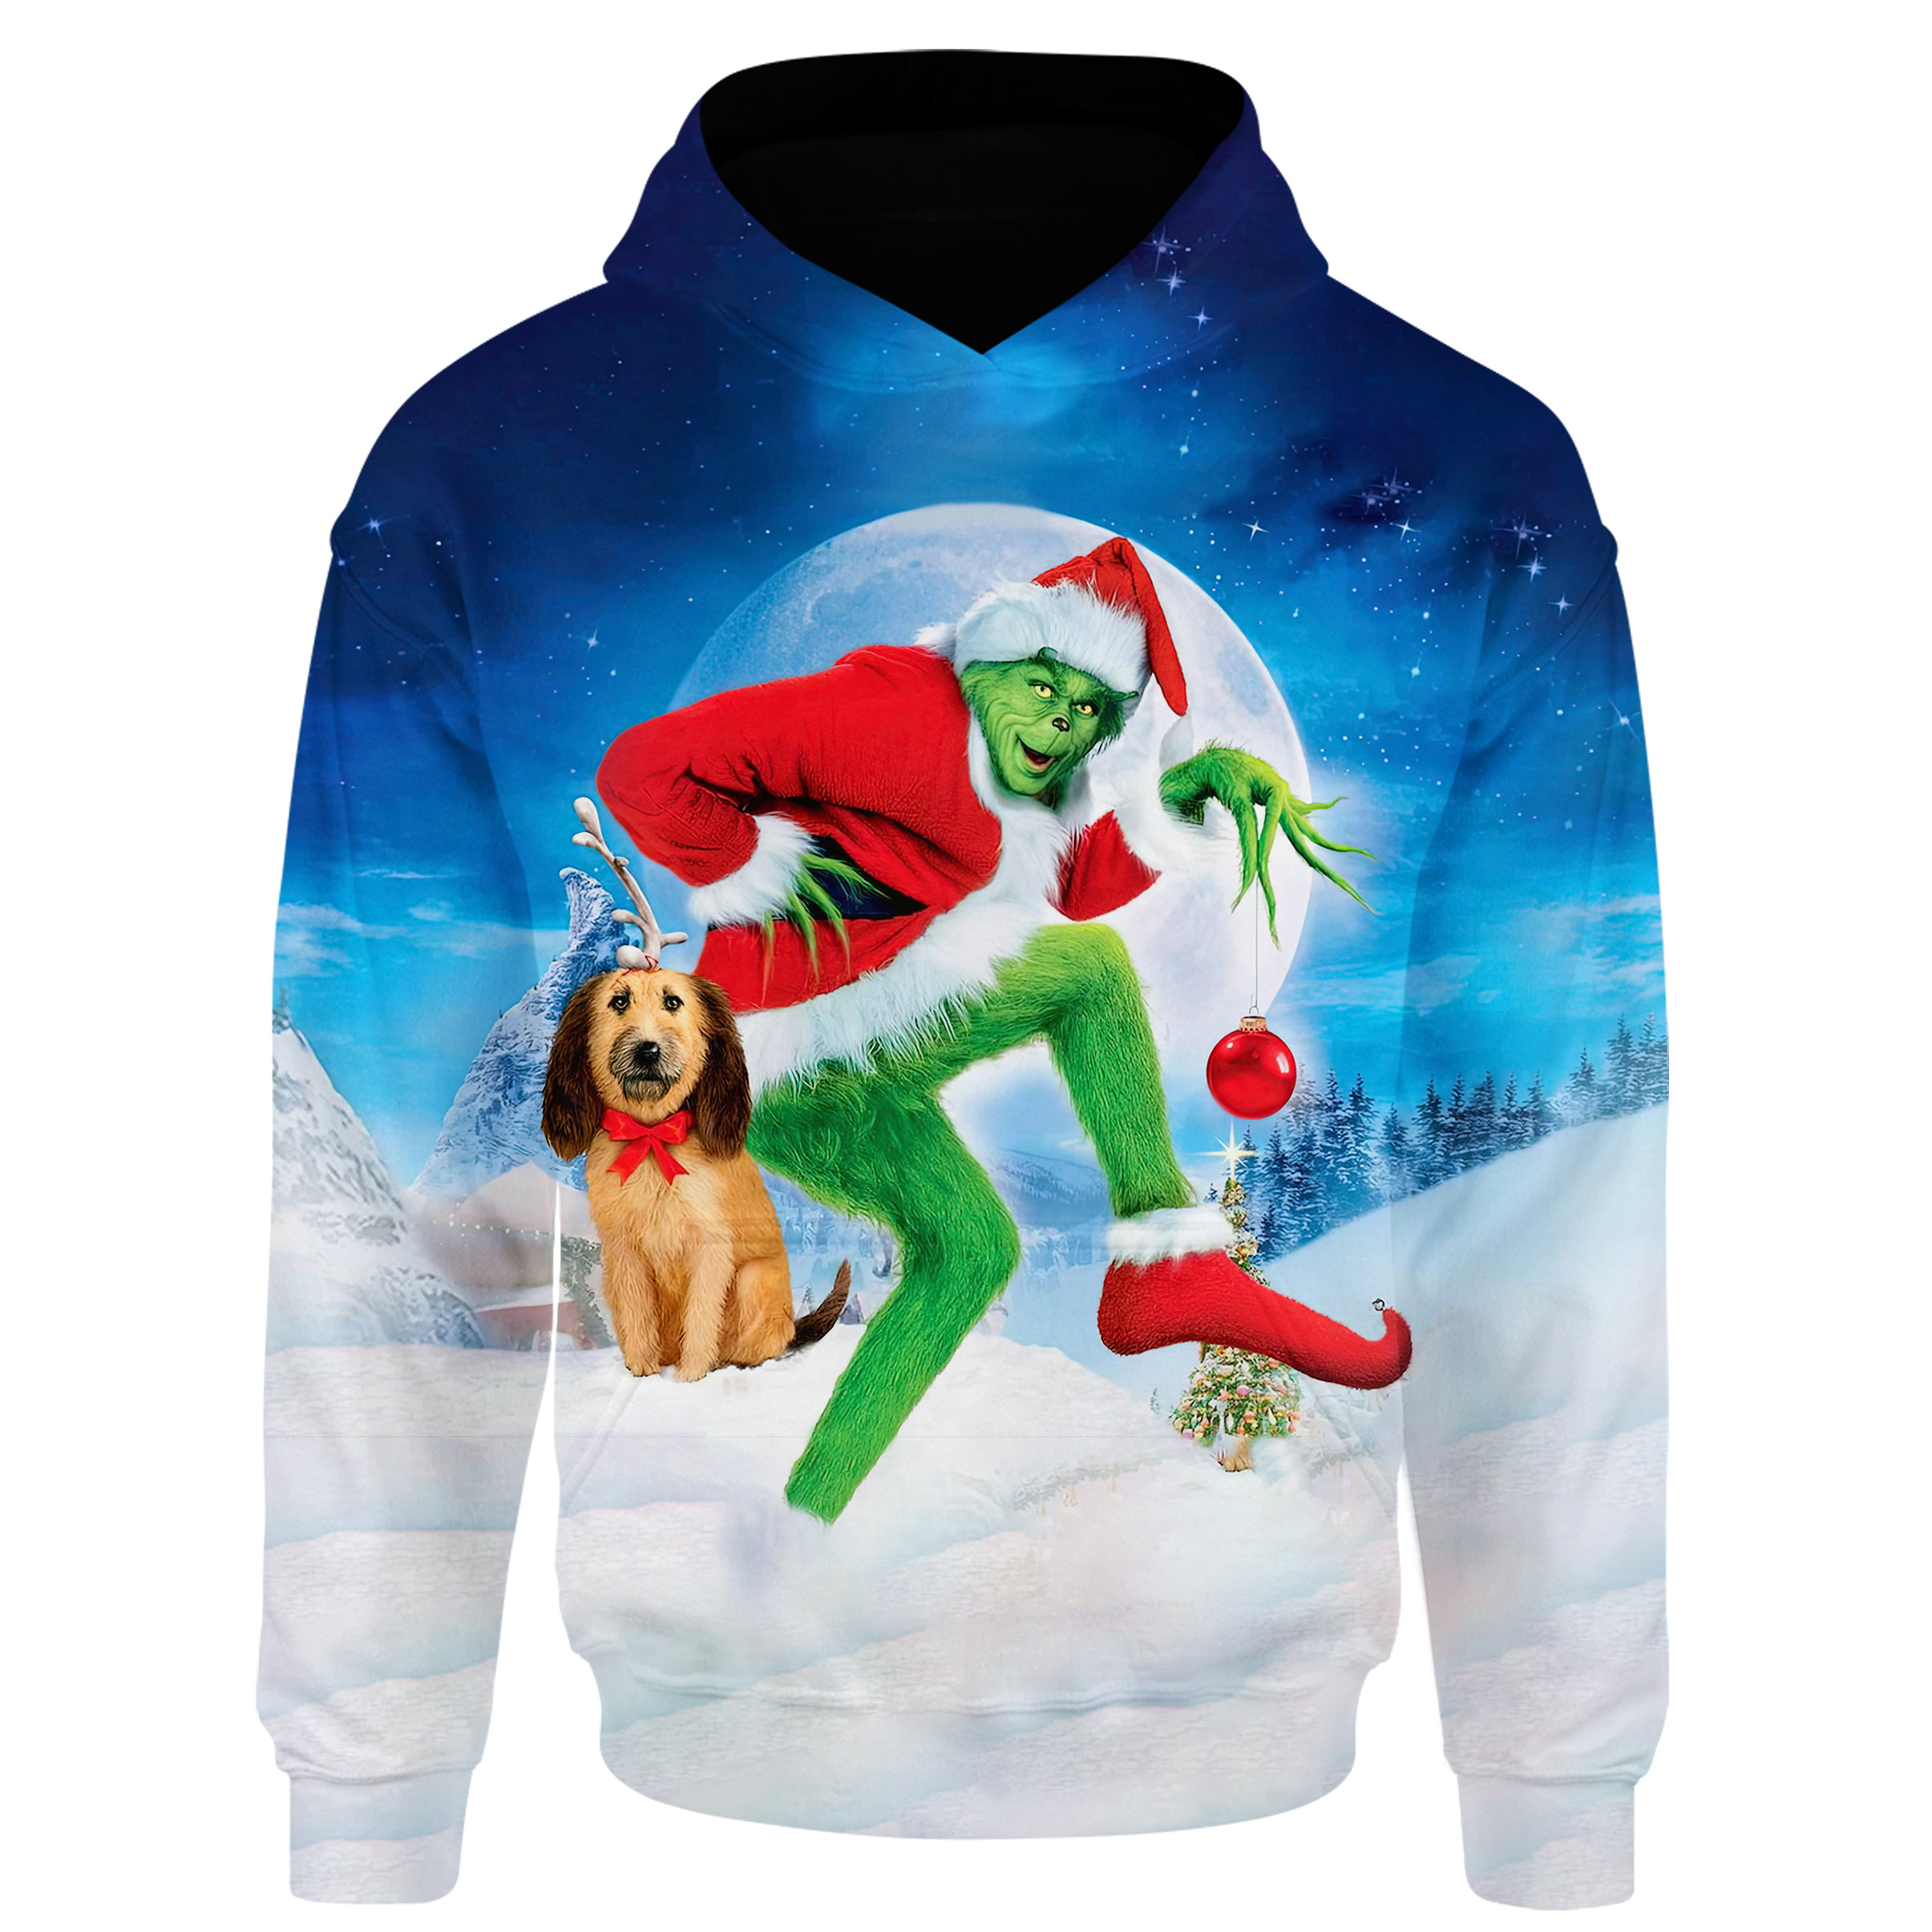 How The Grinch Stole Christmas Hoodie All Over Print Shirt